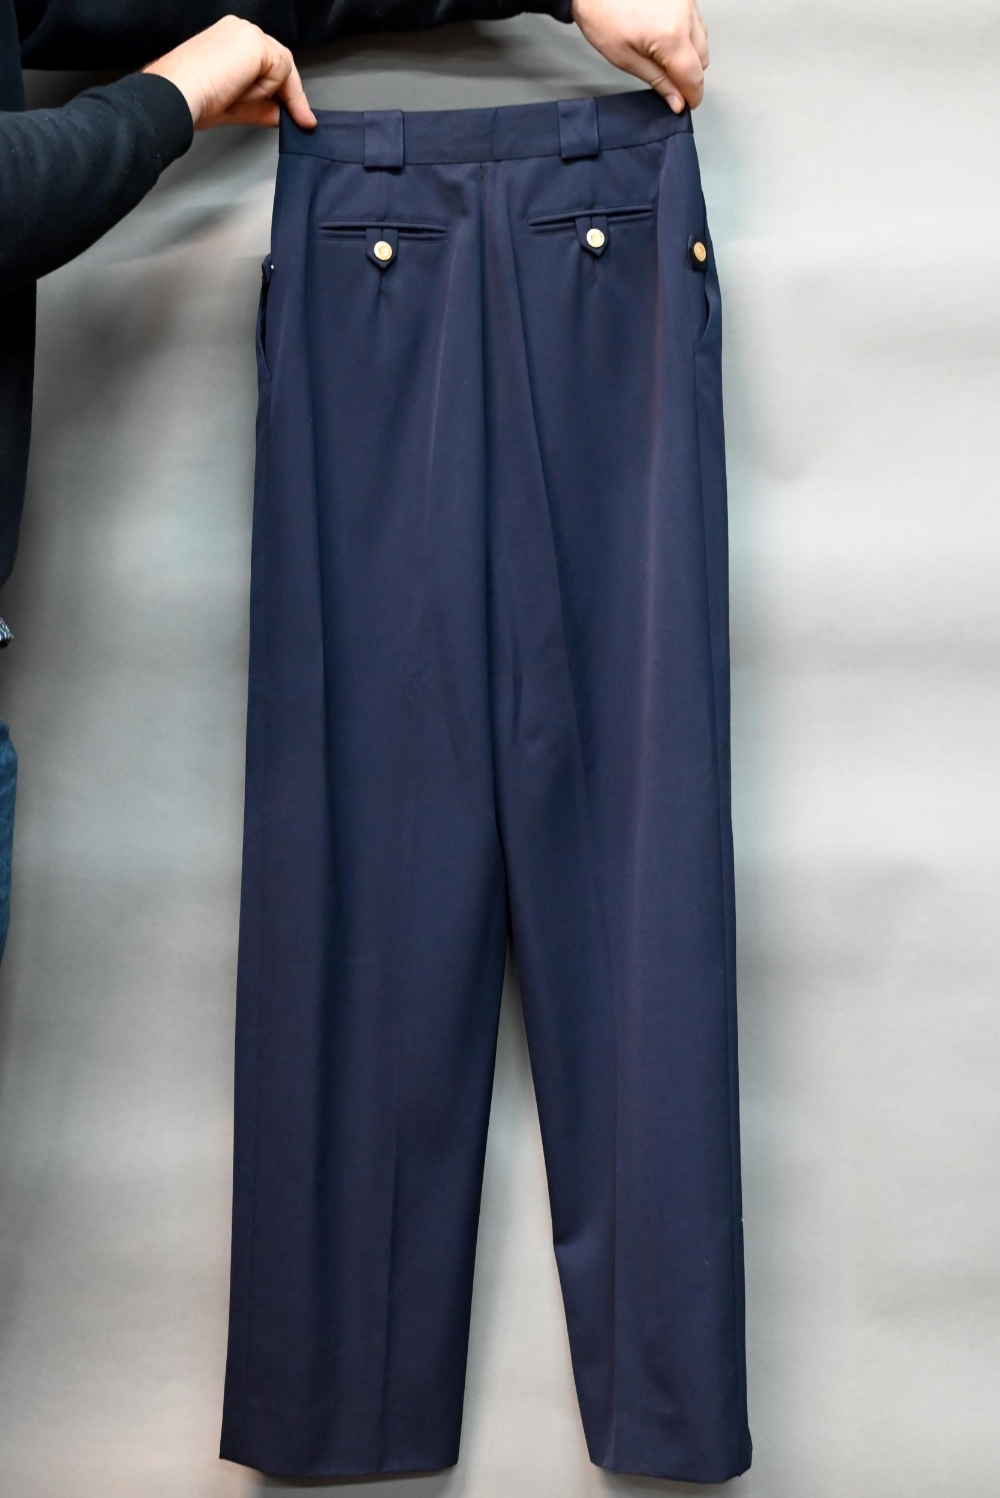 Chanel - A pair of navy trousers, with pleated front and gilt metal button detailing, fully lined, - Image 2 of 6